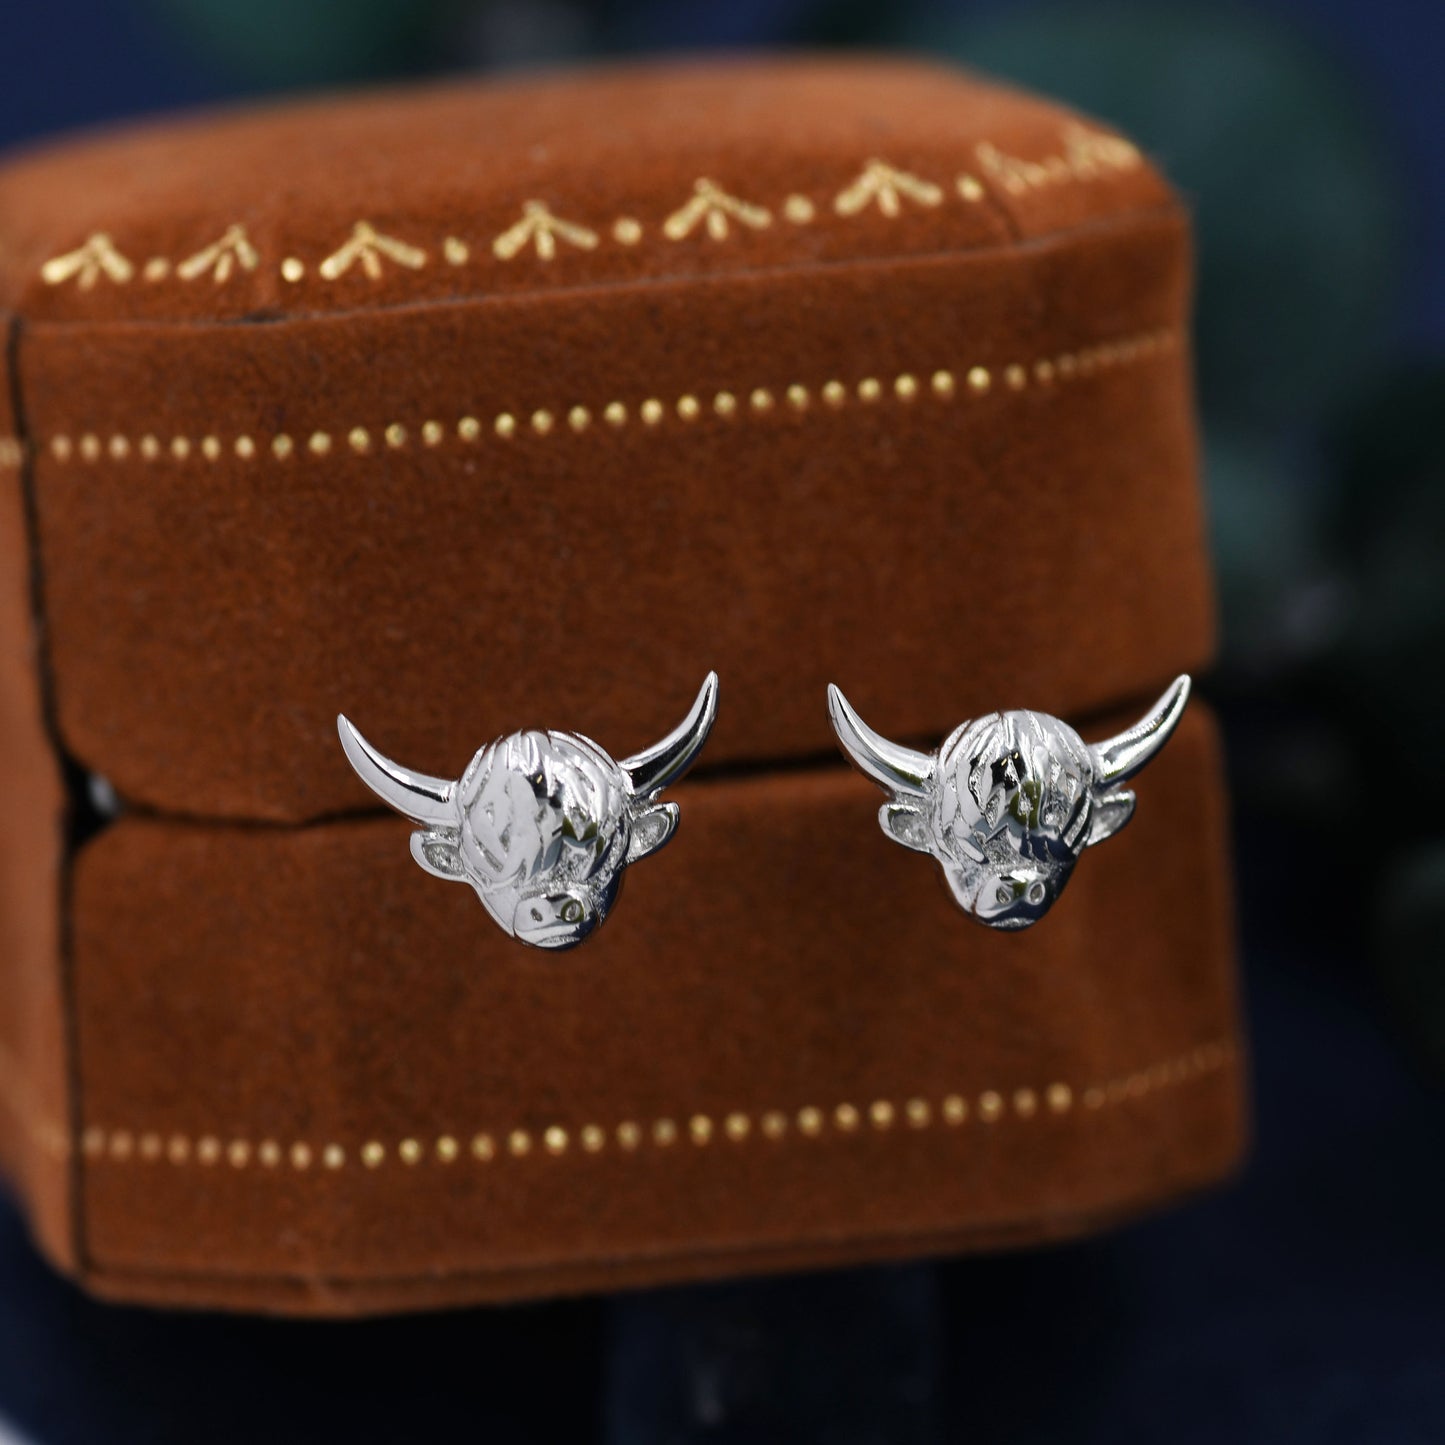 Highland Cow Stud Earrings in Sterling Silver, Cow Stud, Bull Earrings, Petite Earrings, Small Cow Stud, Scotland, Scottish